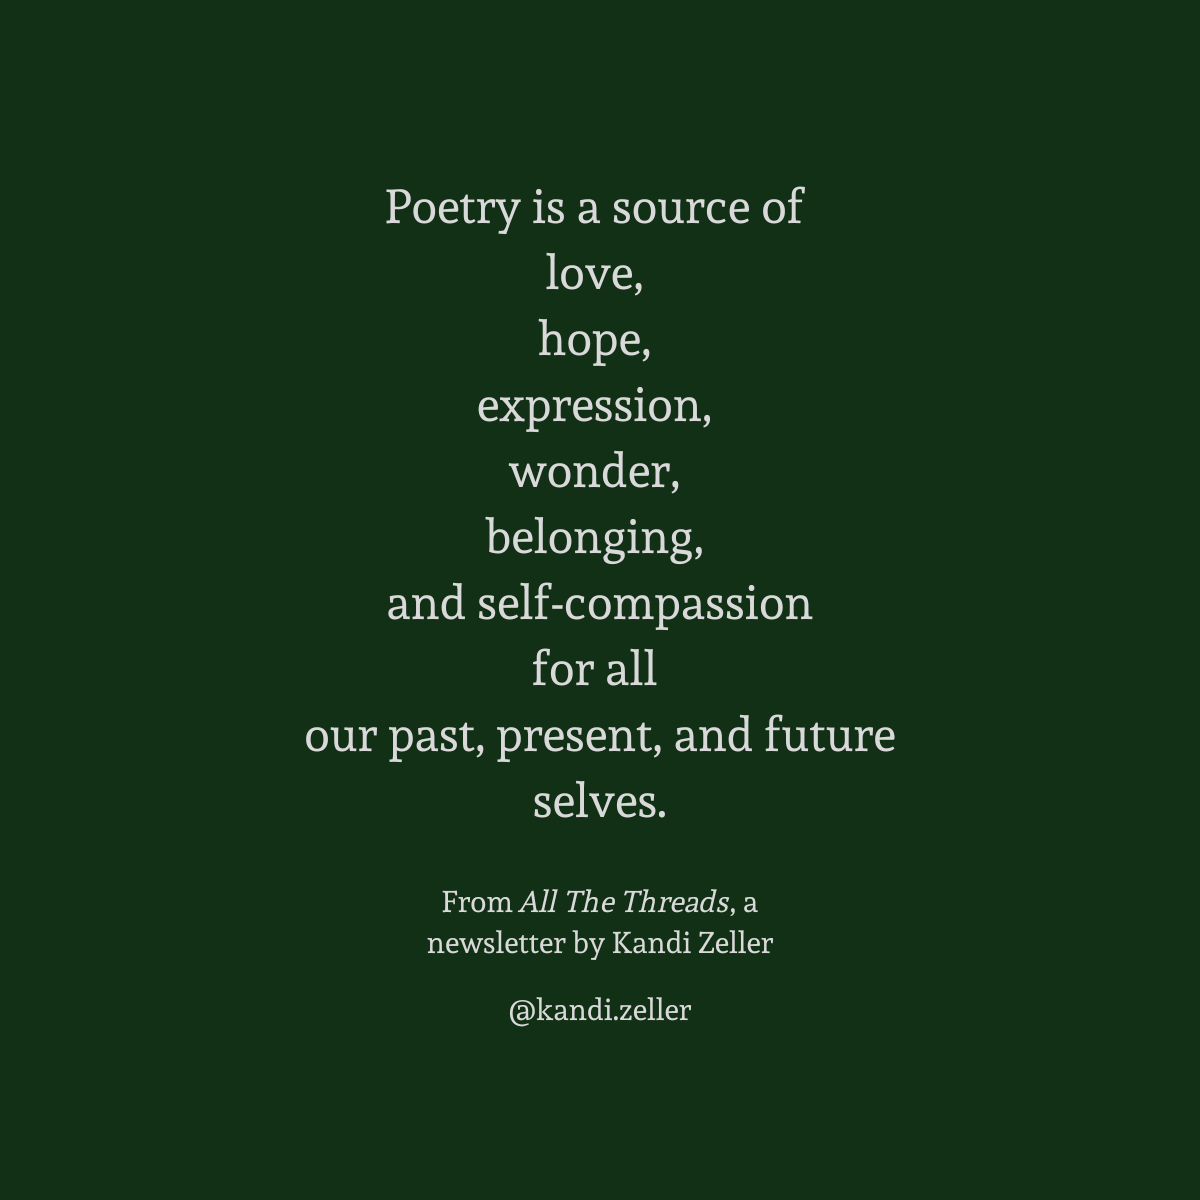 A dark green background with white lettering that reads, “Poetry is a source of love, hope, expression, wonder, belonging, and self-compassion for all our past, present, and future selves.” This is followed by the words, “From All The Threads, a newsletter by Kandi Zeller, @Kandi.Zeller”